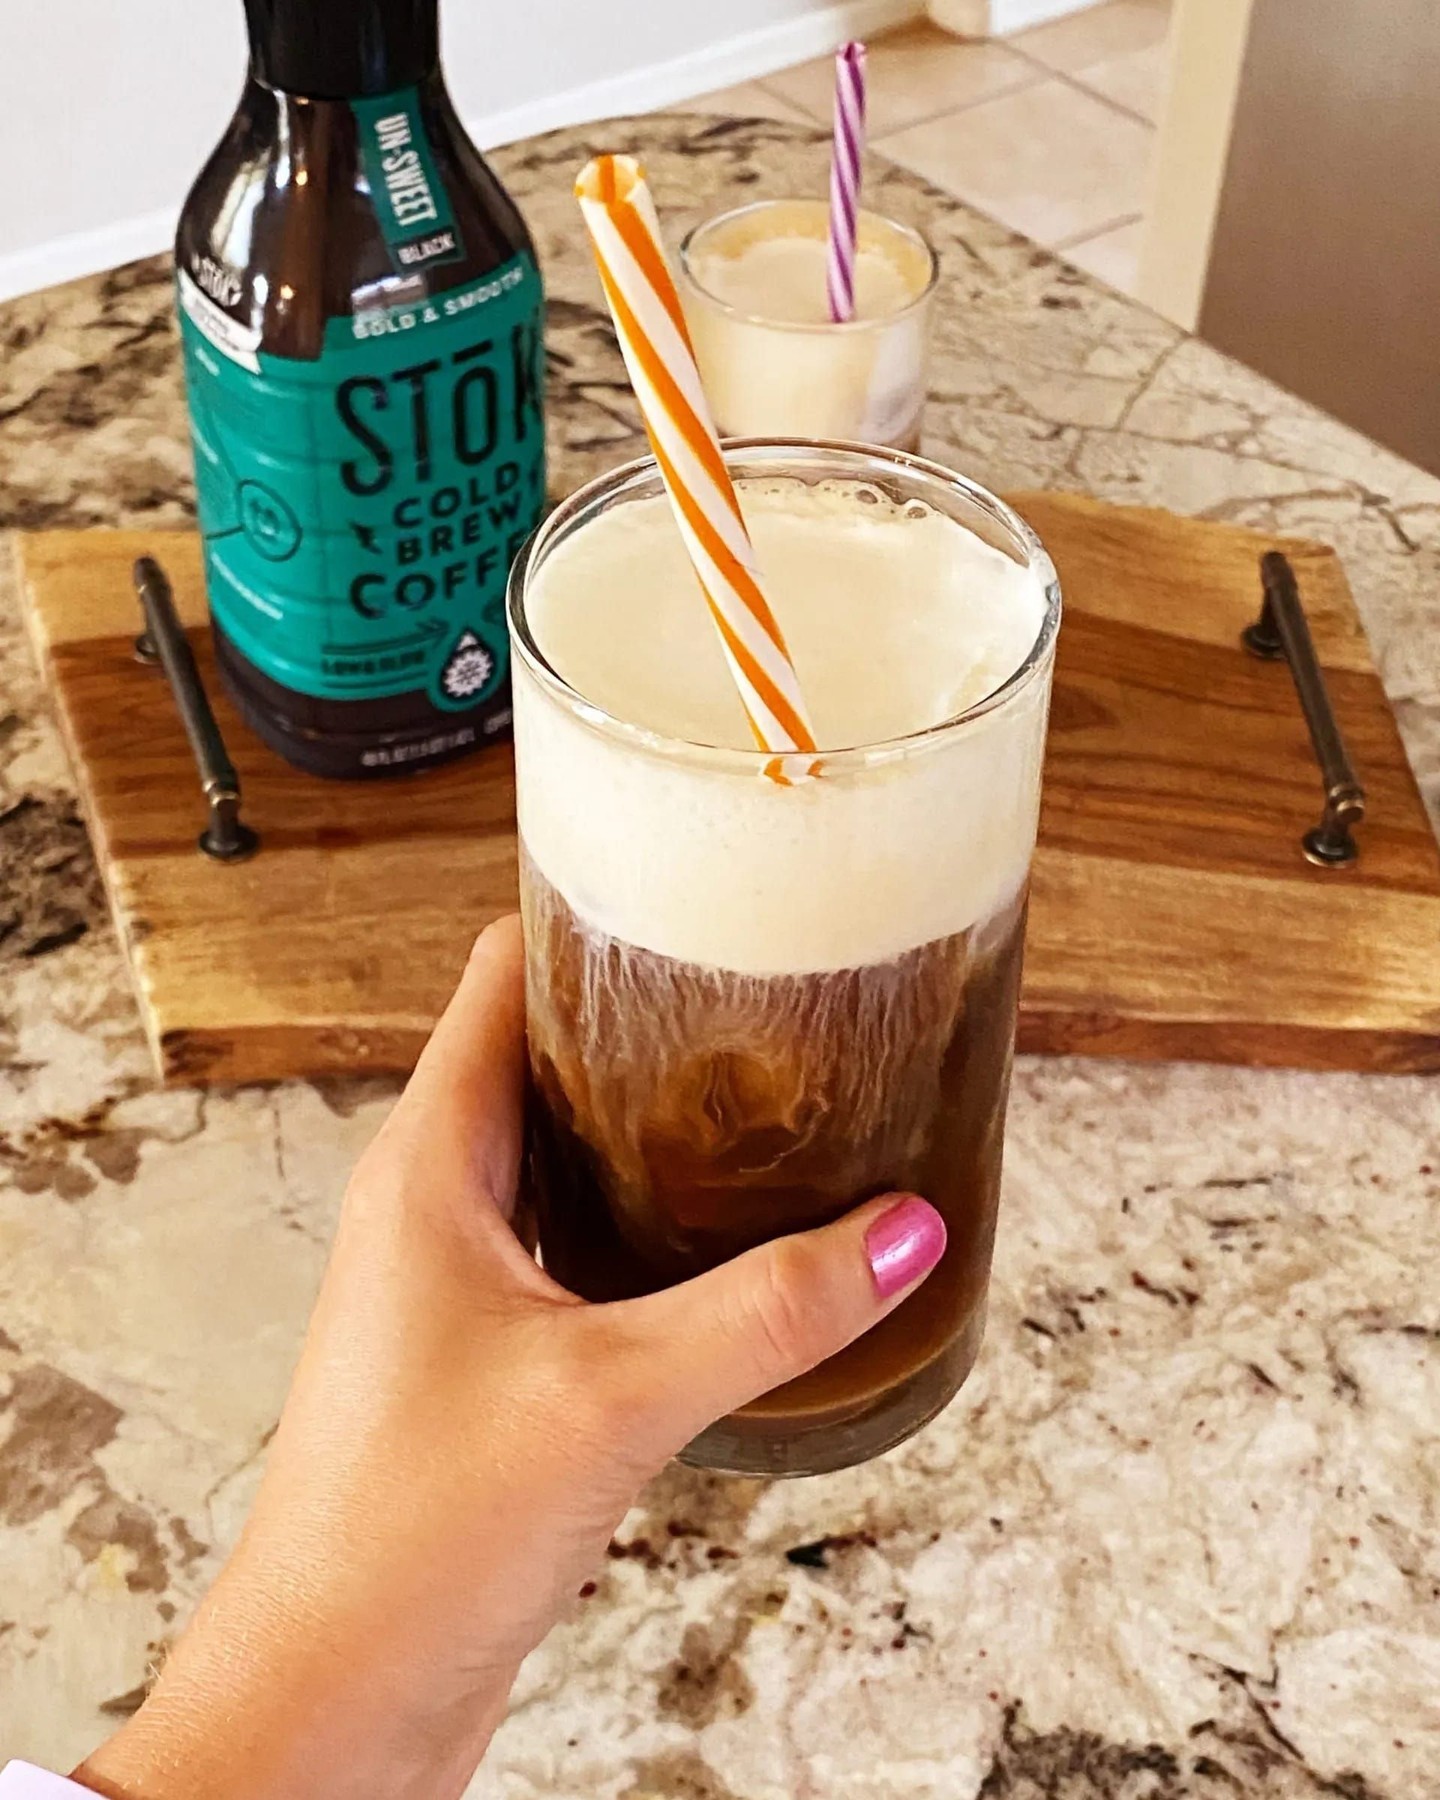 Did you know you can make your own flavored cold foam for your coffee at home? It only takes three simple ingredients and voila! Summer afternoons are a great time for some cold brew coffee topped with cold foam :-)⁣
Find this recipe at SixCleverSisters.com (and hundreds more!!!)⁣
⁣
#sixcleversisters #coffee #coldfoam #coldbrew #coffeeoftheday #coffeeplease #butfirstcoffee #icedcoffee #coffeelife #coffeelover #homemade #diy #doityourself #coffeecoffeecoffee #coffeeislife #cotd #diyideas #recipes #recipeoftheday #rotd #recipe